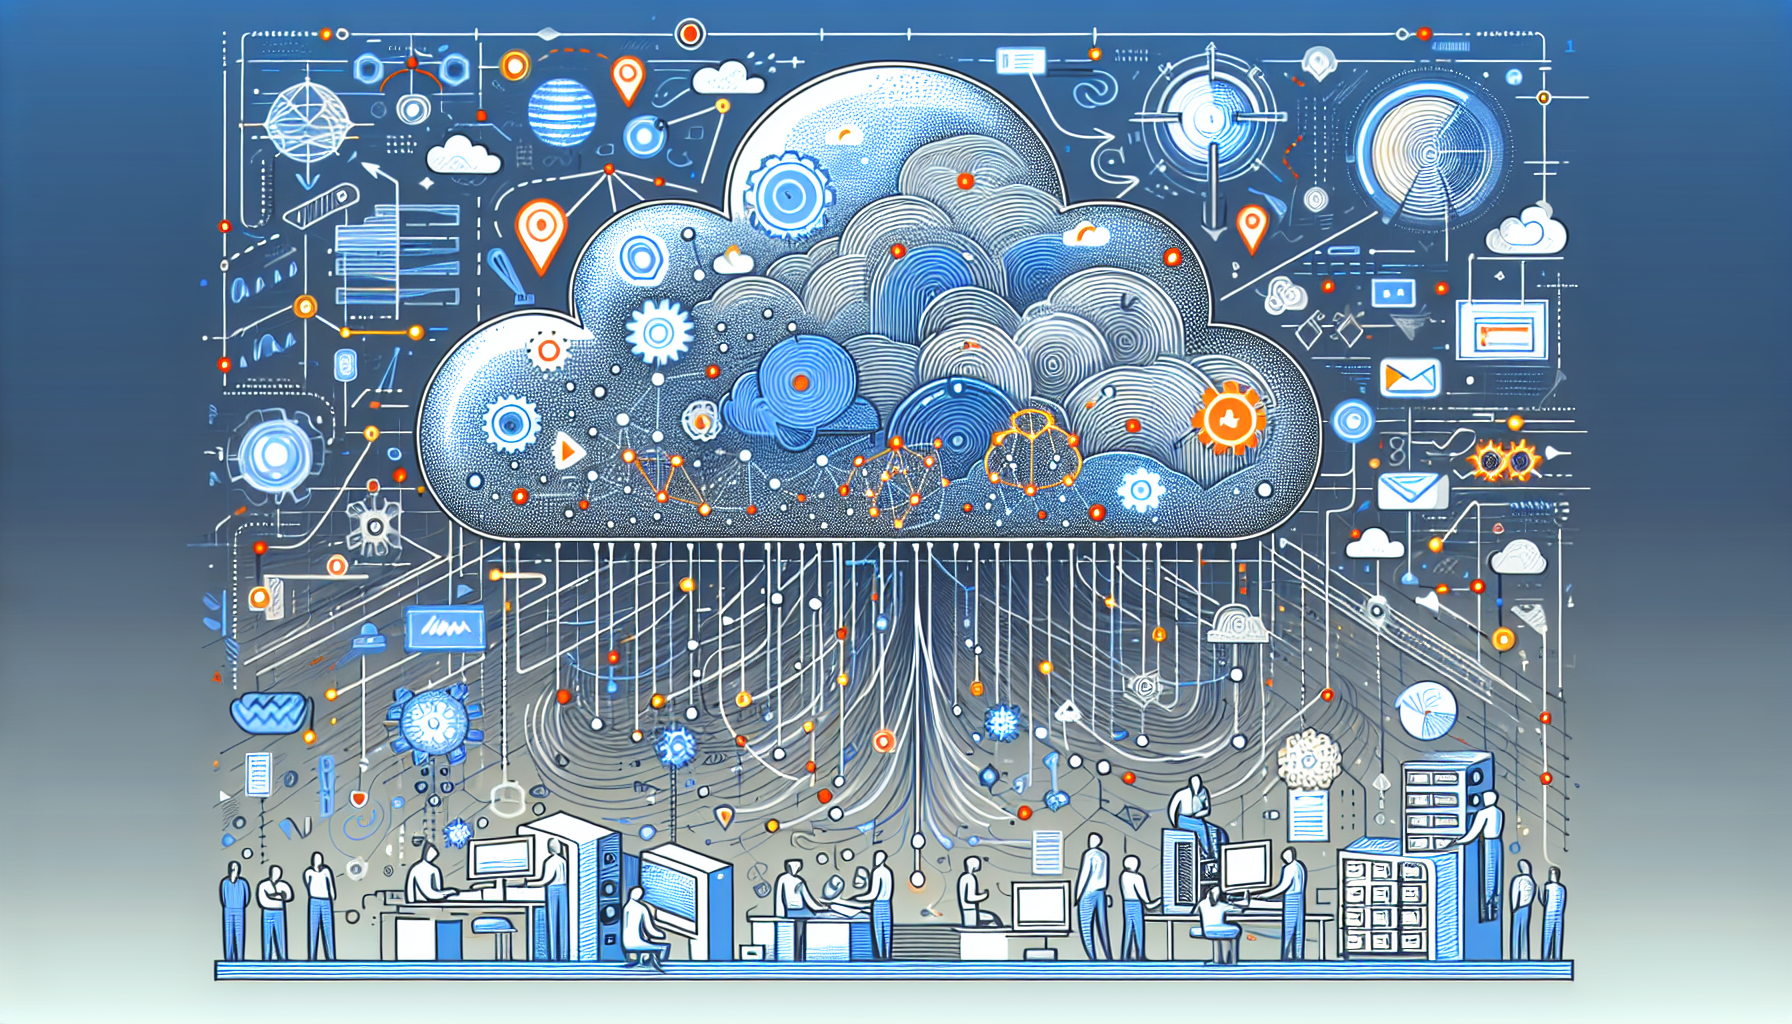 Illustration of cloud-based CRM technologies and data management